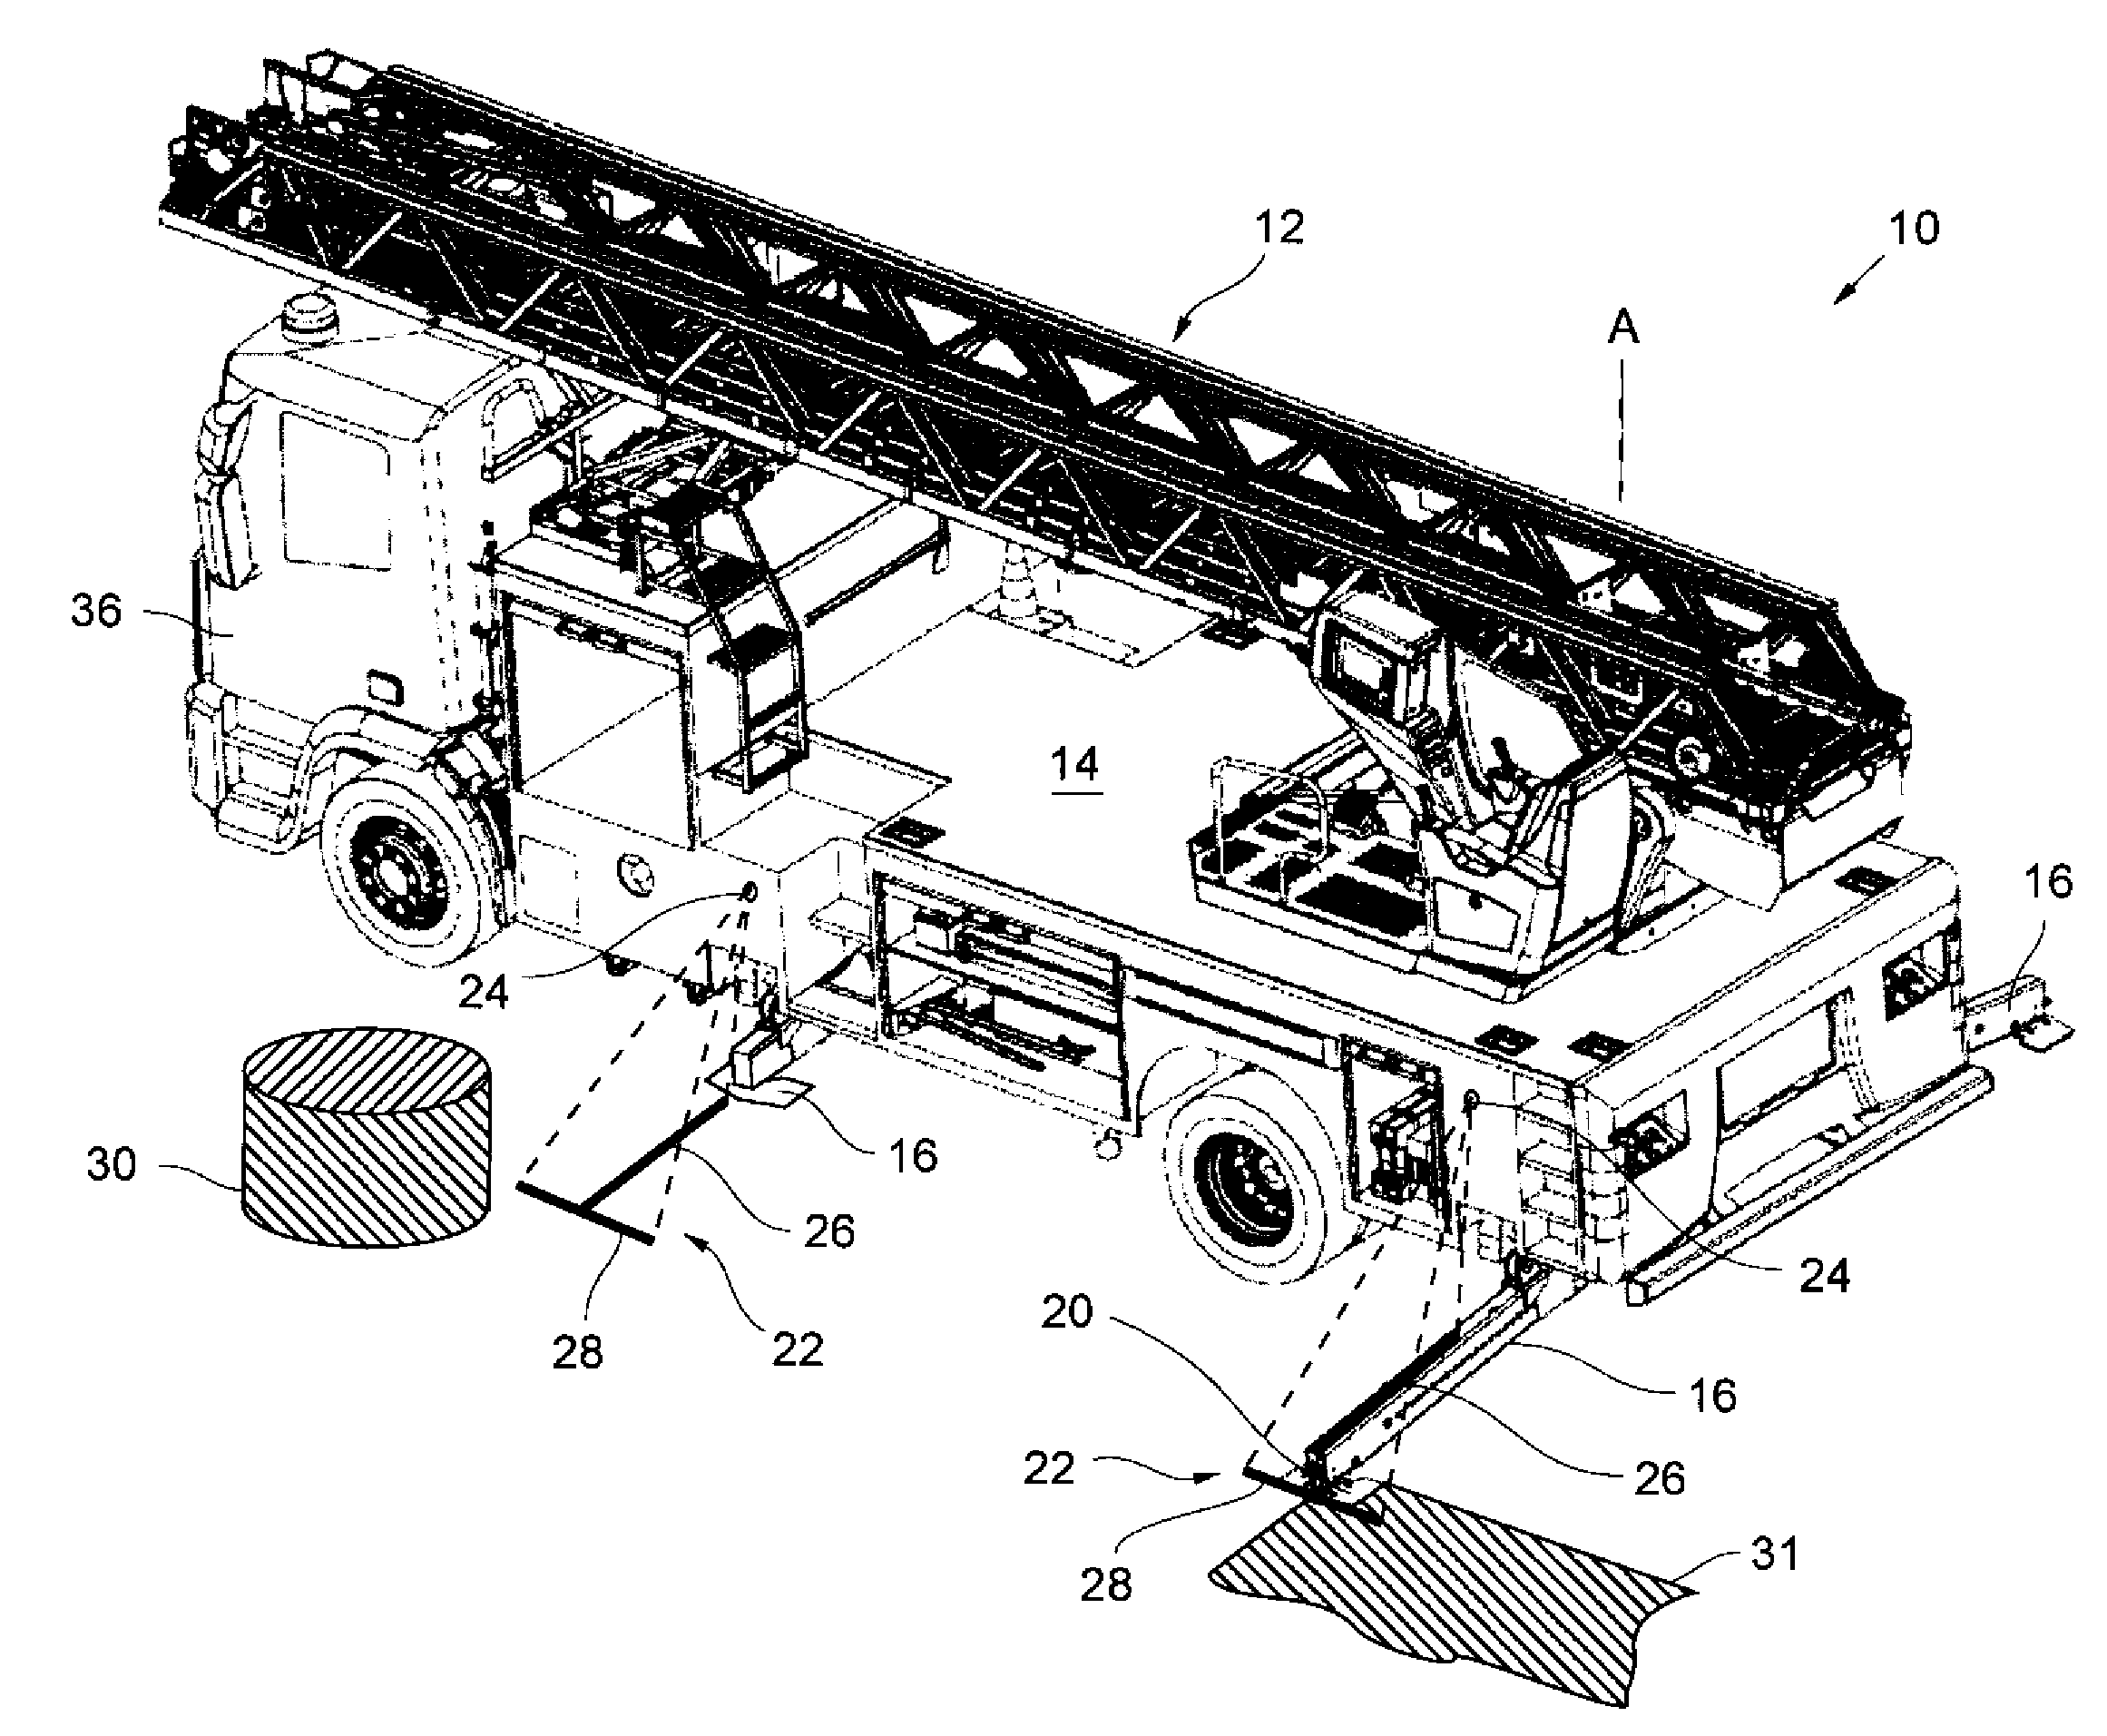 Utility vehicle with assistance system for positioning lateral ground supports